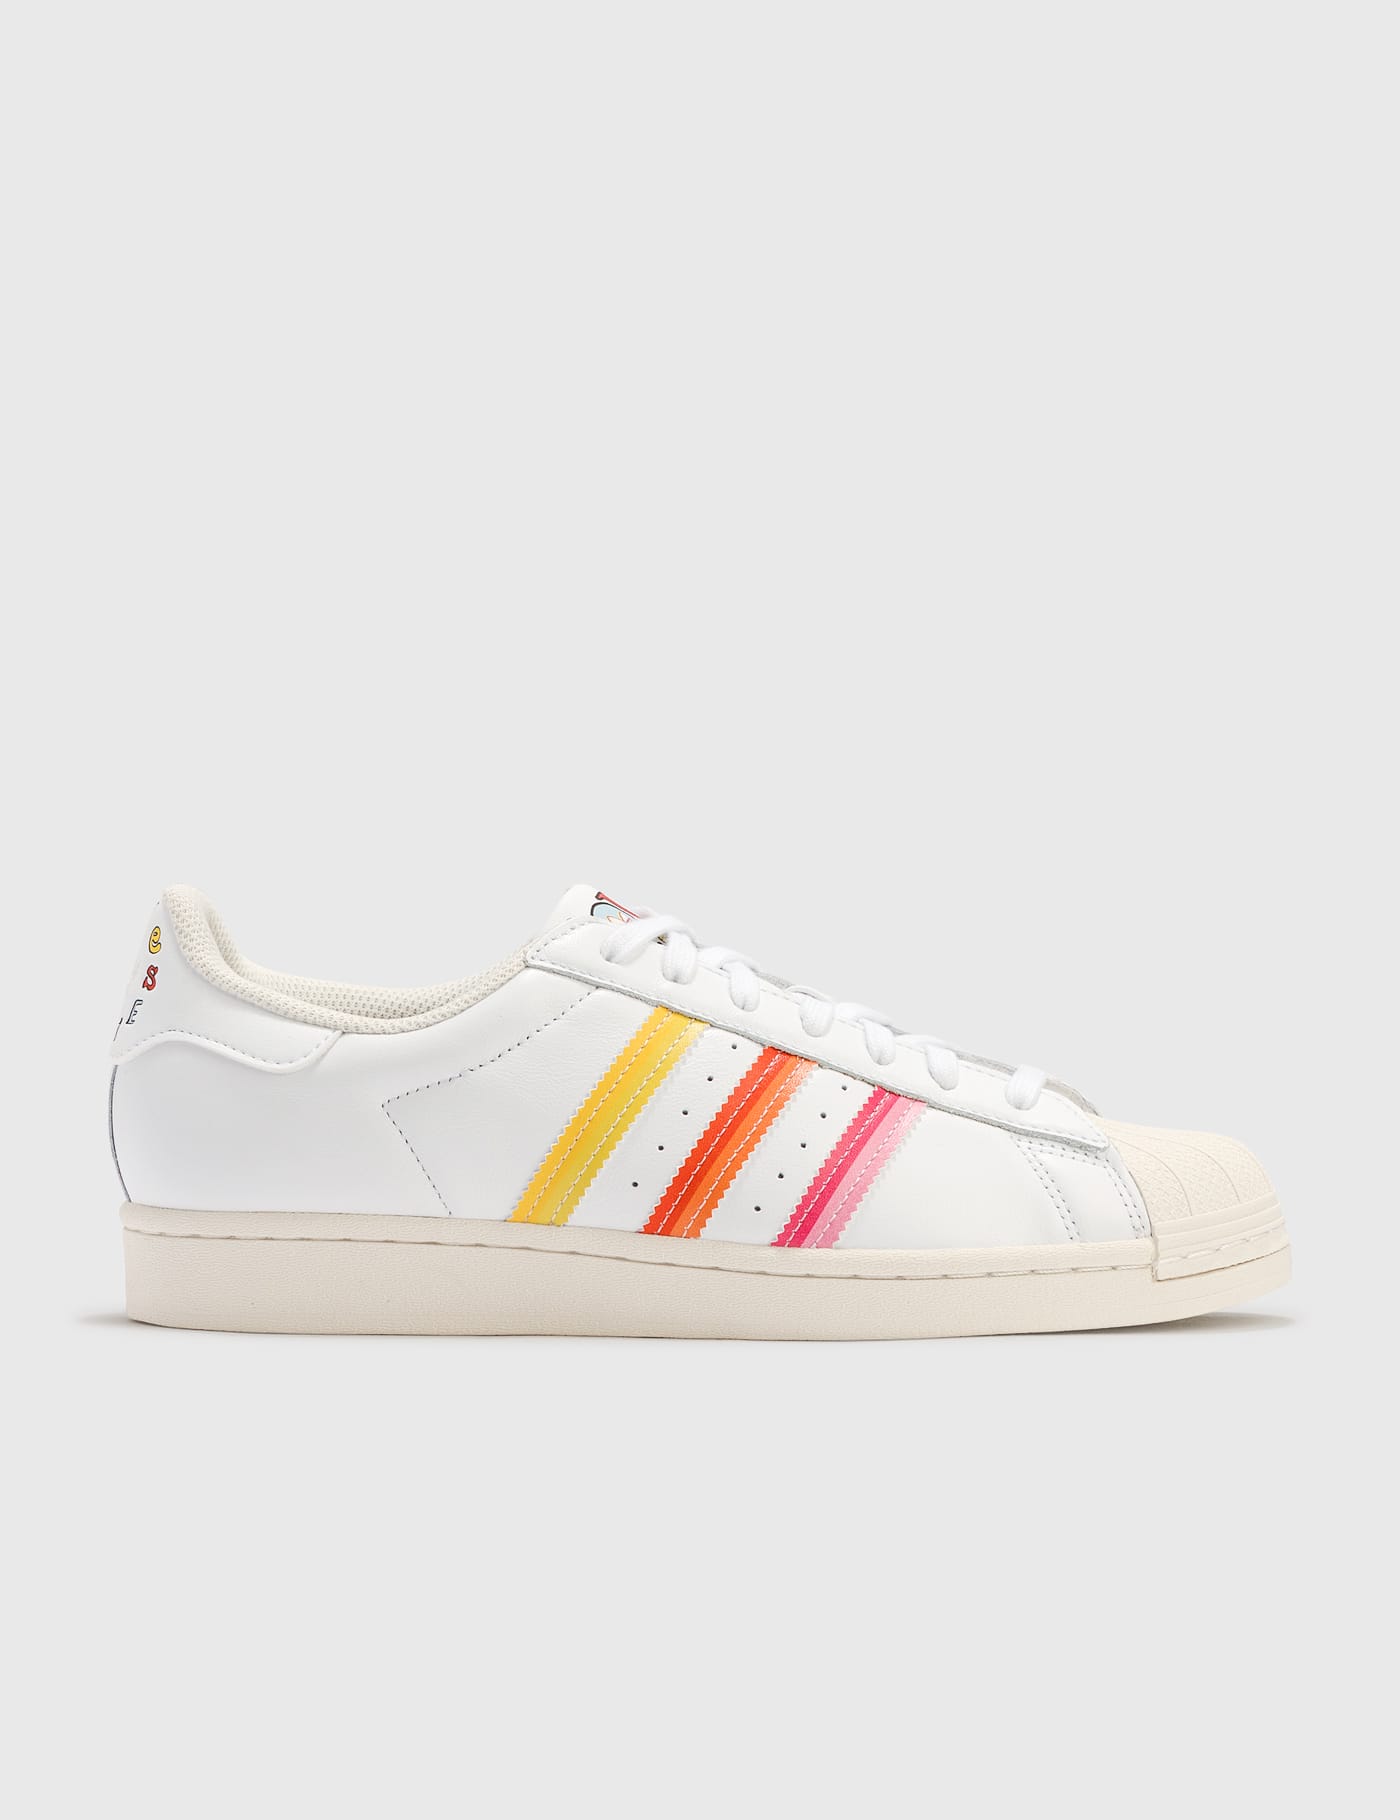 Adidas Originals - Superstar Pride | HBX - Globally Curated Fashion and  Lifestyle by Hypebeast كوبيه